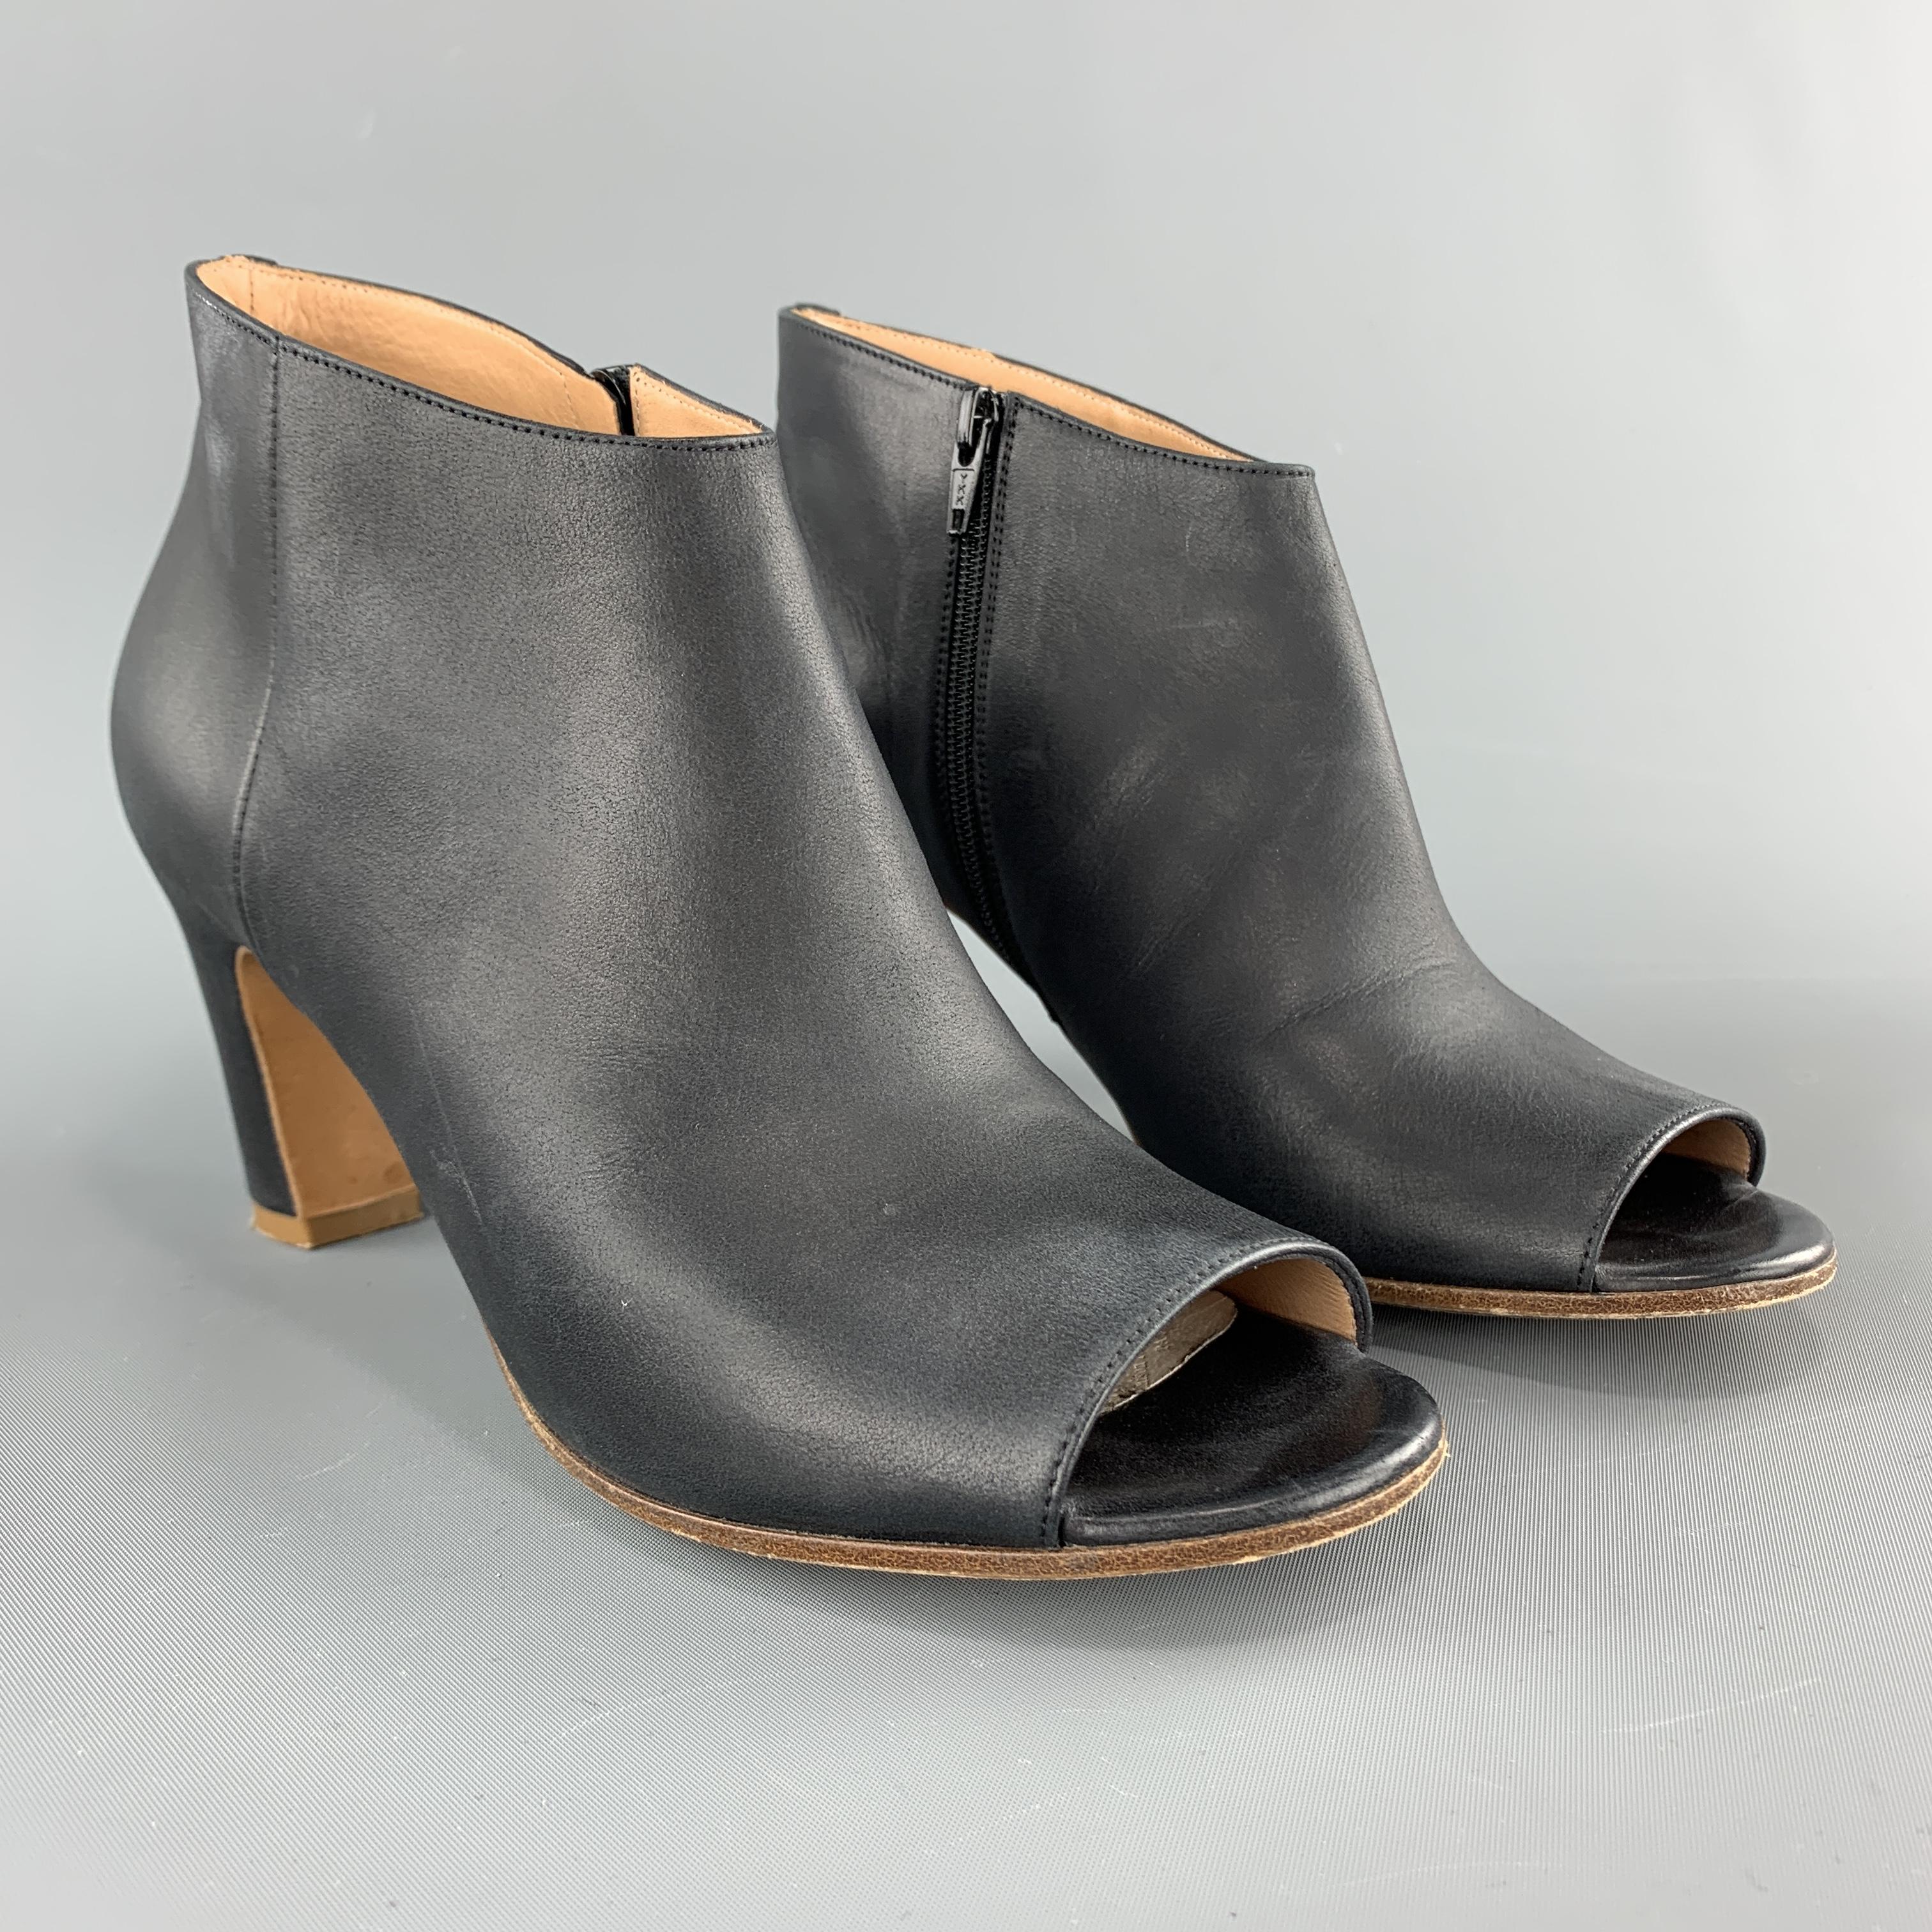 MAISON MARTIN MARGIELA ankle booties come in smooth navy leather with a peep toe, inner zip, covered heel, and white back stitch. Minor Wear. As-is. Made in Italy.

Good Pre-Owned Condition.
Marked: IT 37.5
Original Retail Price: $890.00

Heel: 3 in.